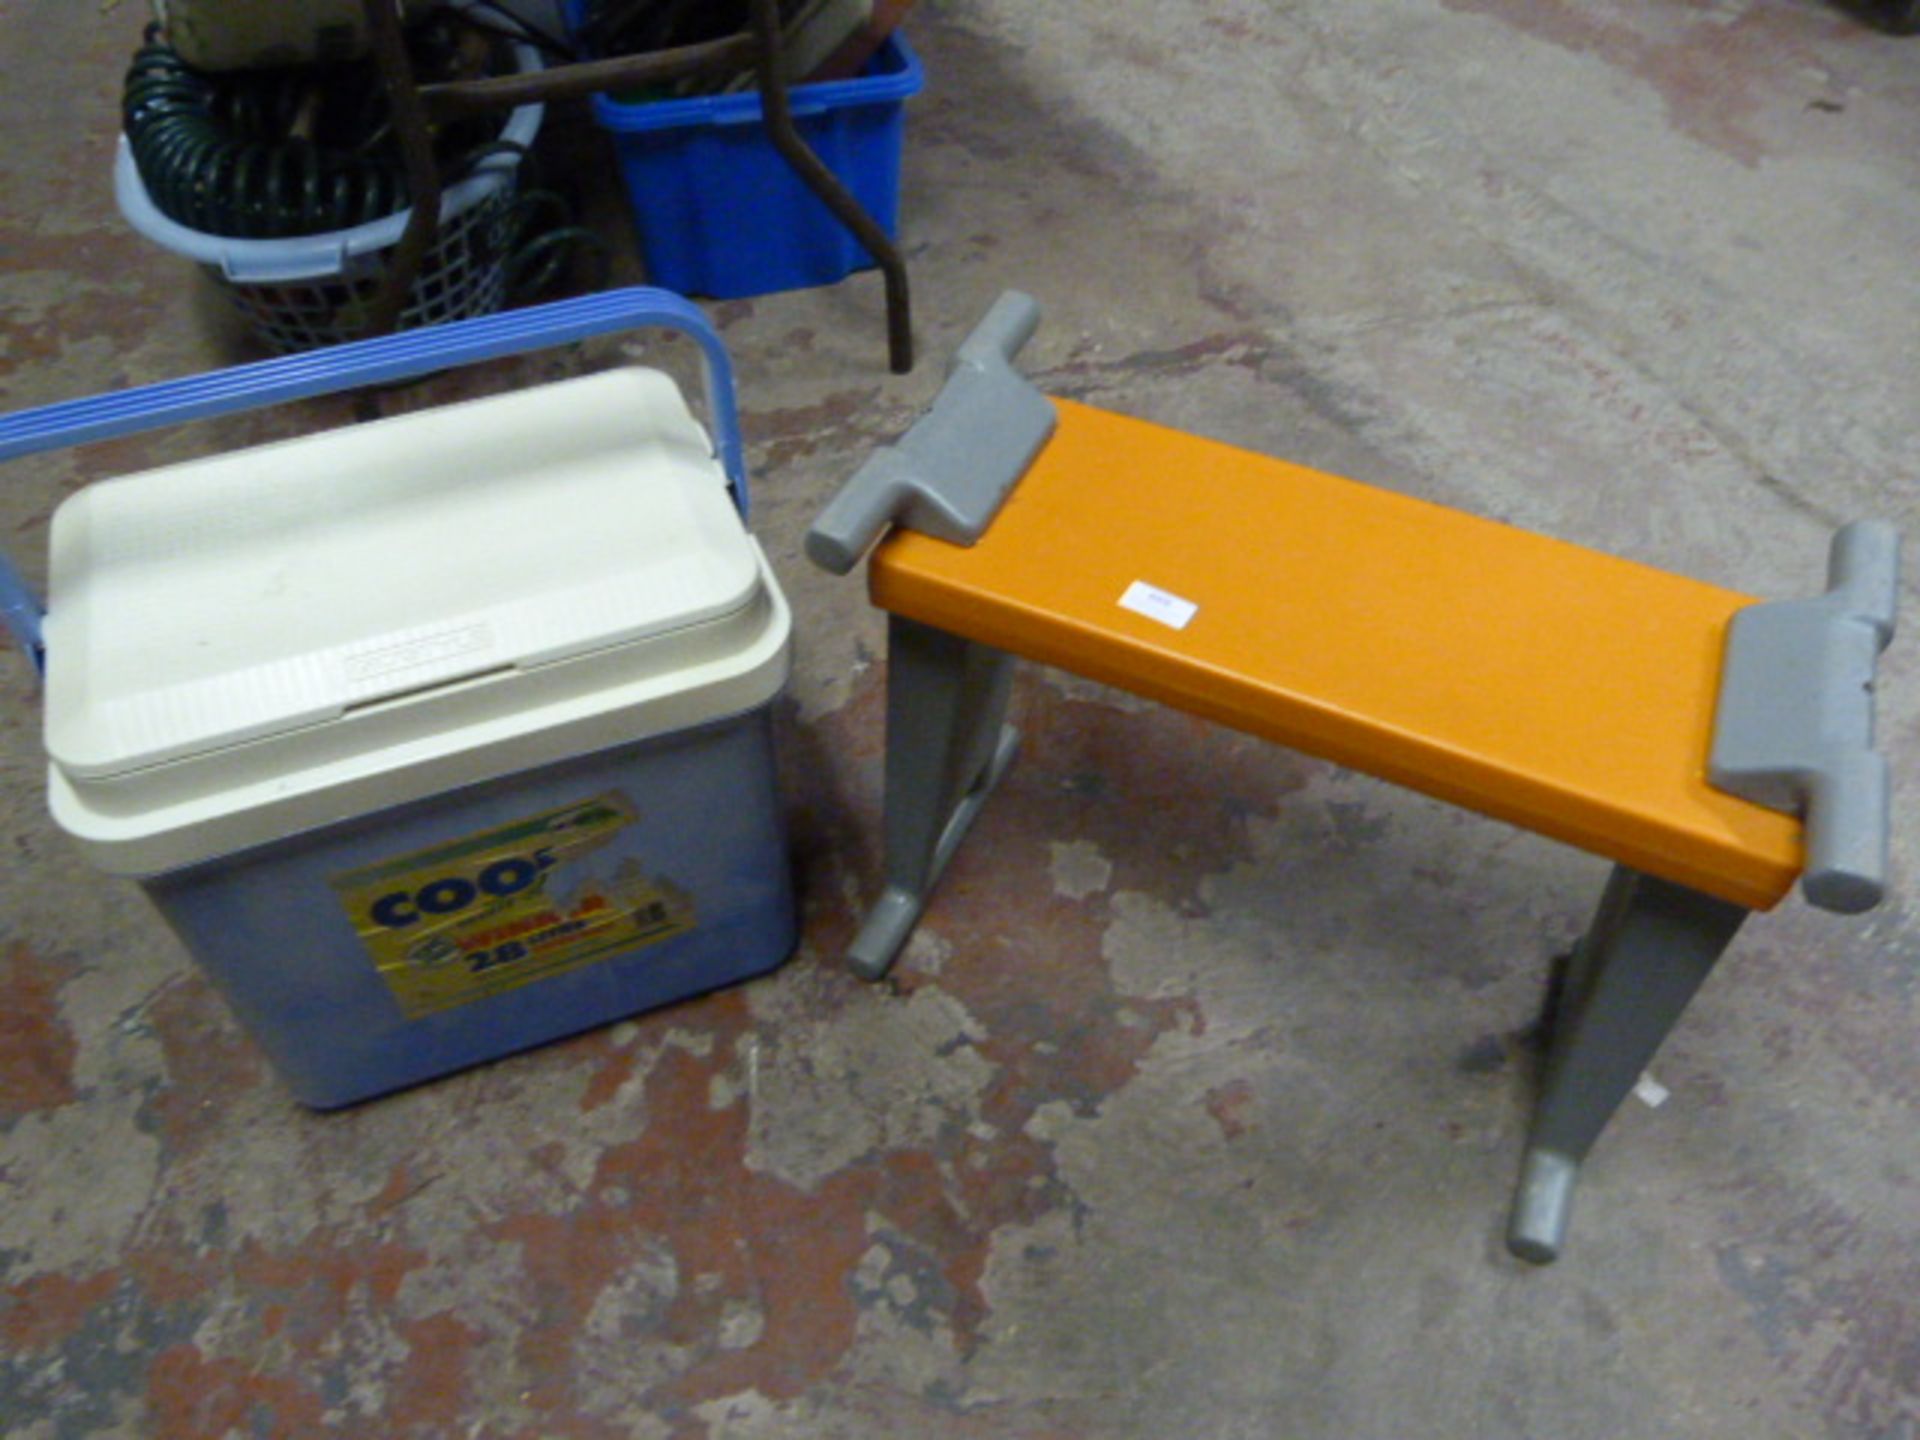 Cool Box and a Folding Garden Stool